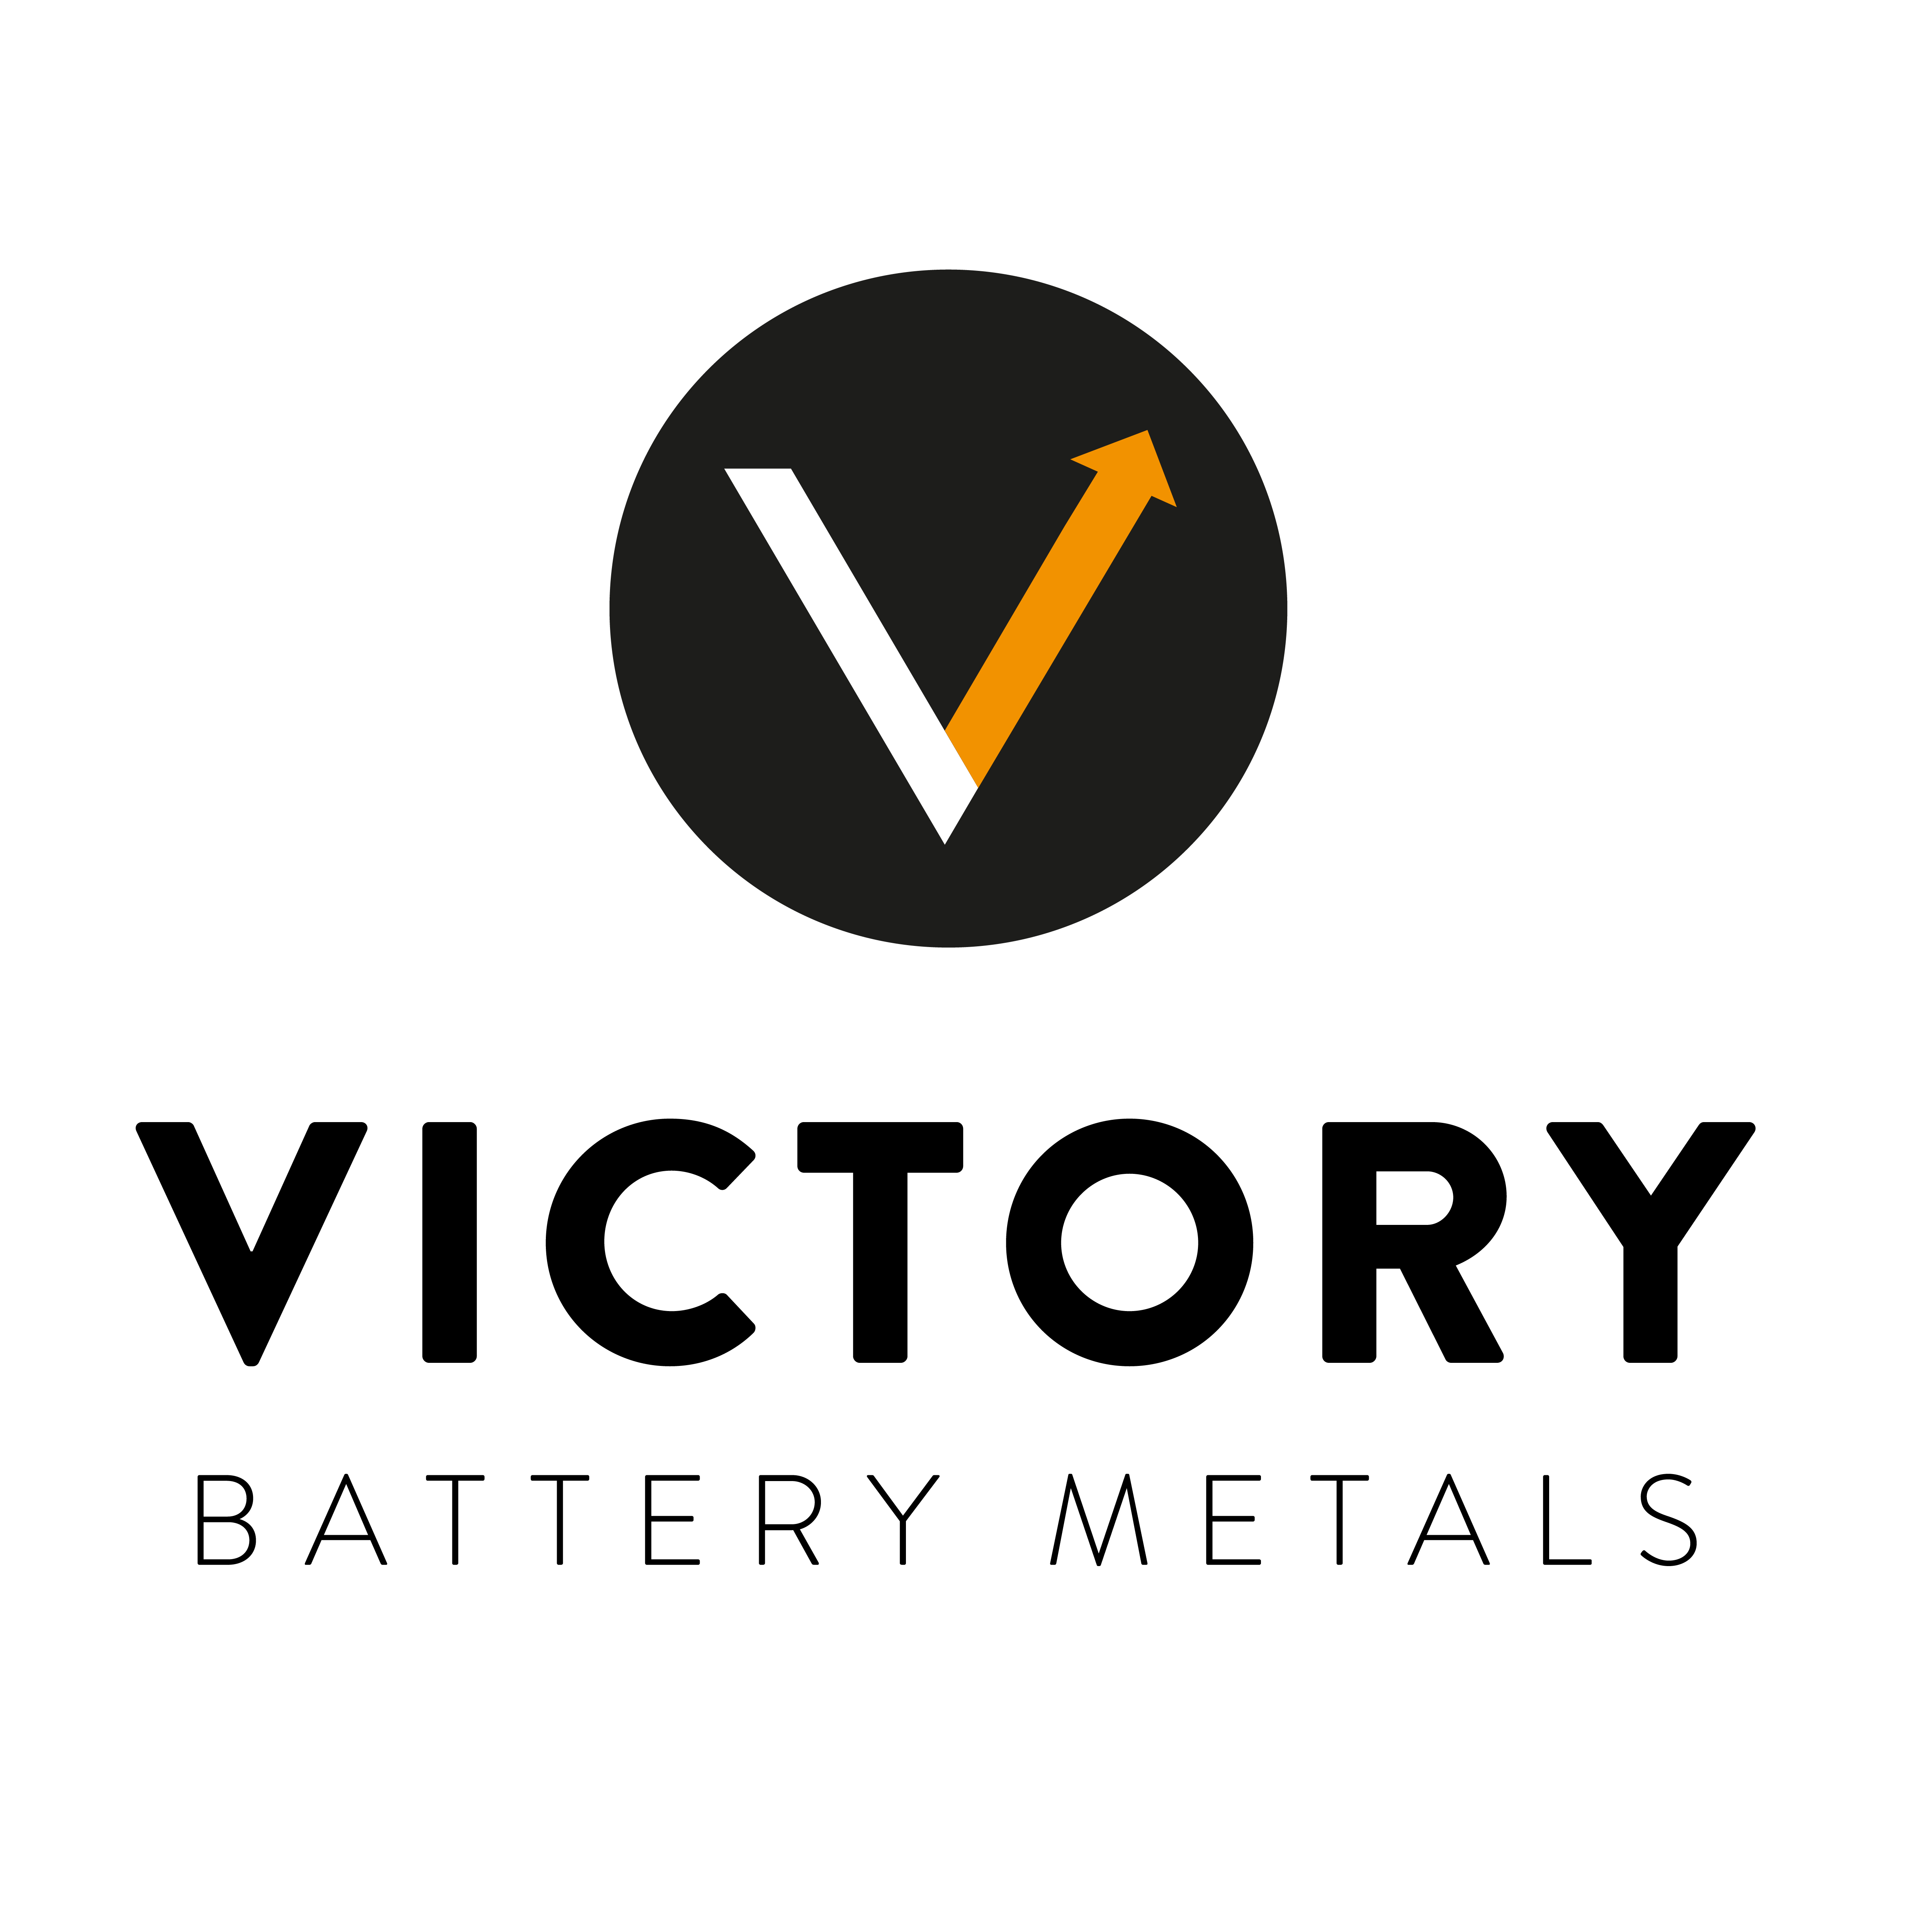 Victory Battery Metals Expedites Exploration By Leveraging Asset Rich Portfolio In Mining-Friendly Lithium Mining Jurisdictions ($VRCFF)